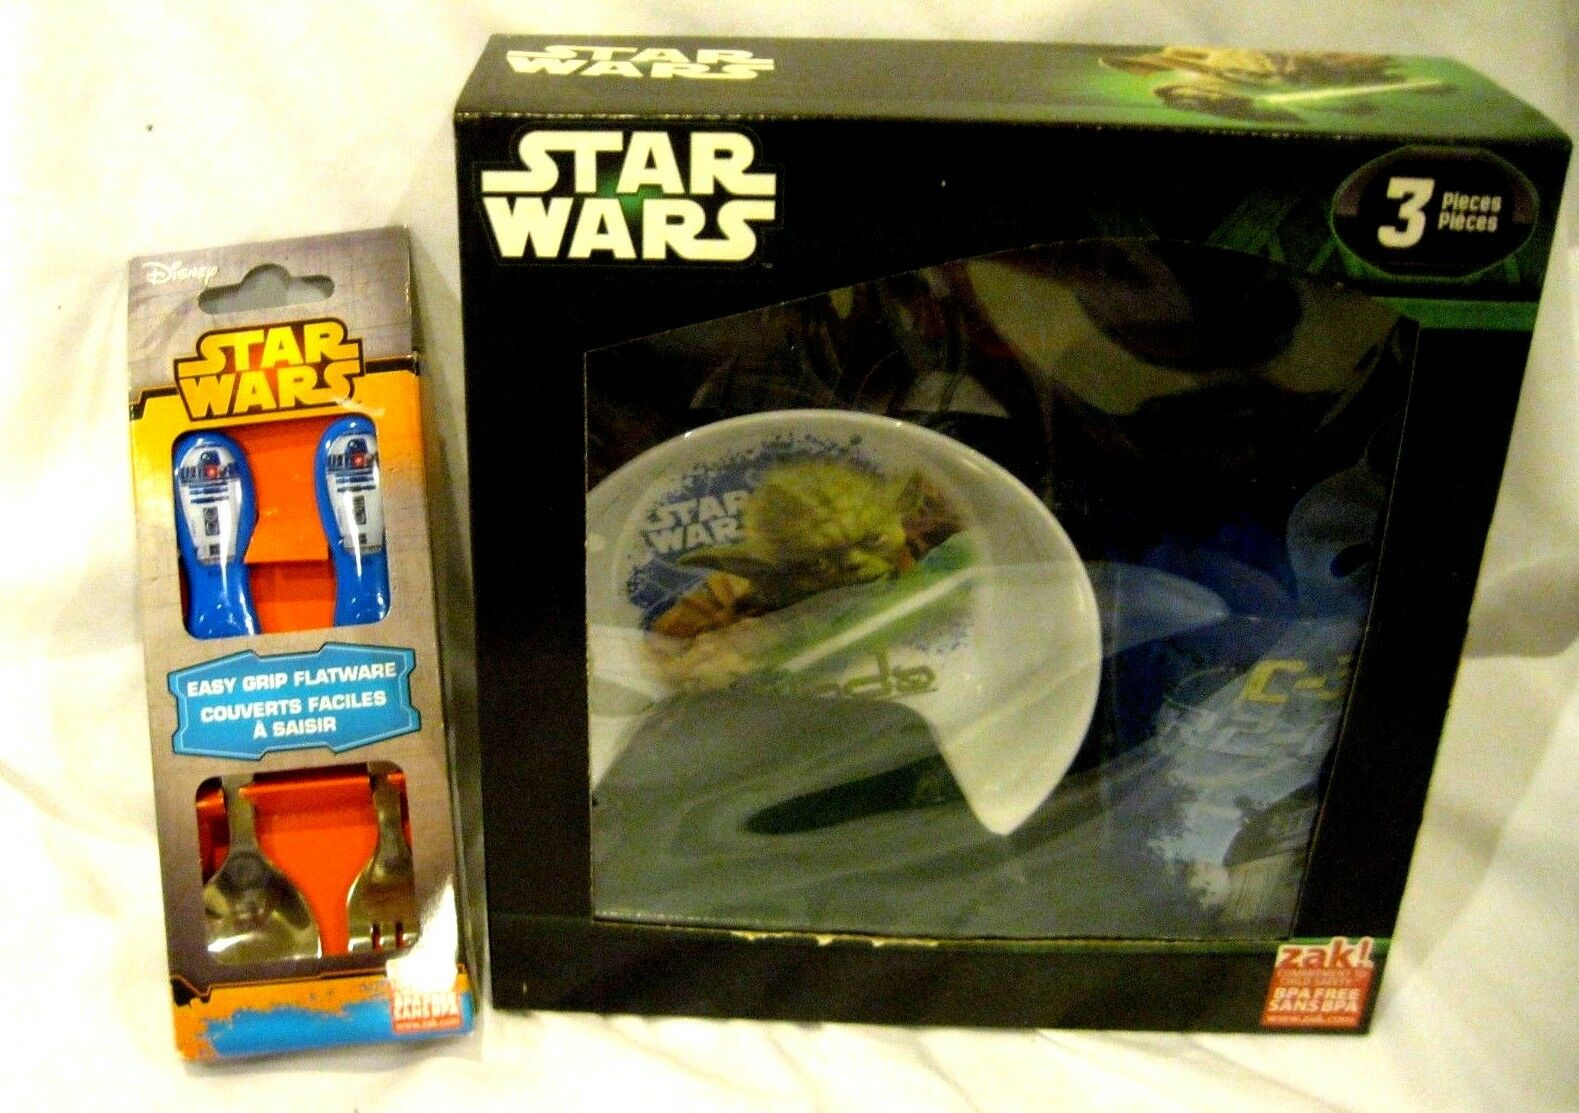 Star Wars Mealtime Dinnerware Set Includes Plate,bowl,cup, And Flatware-new!